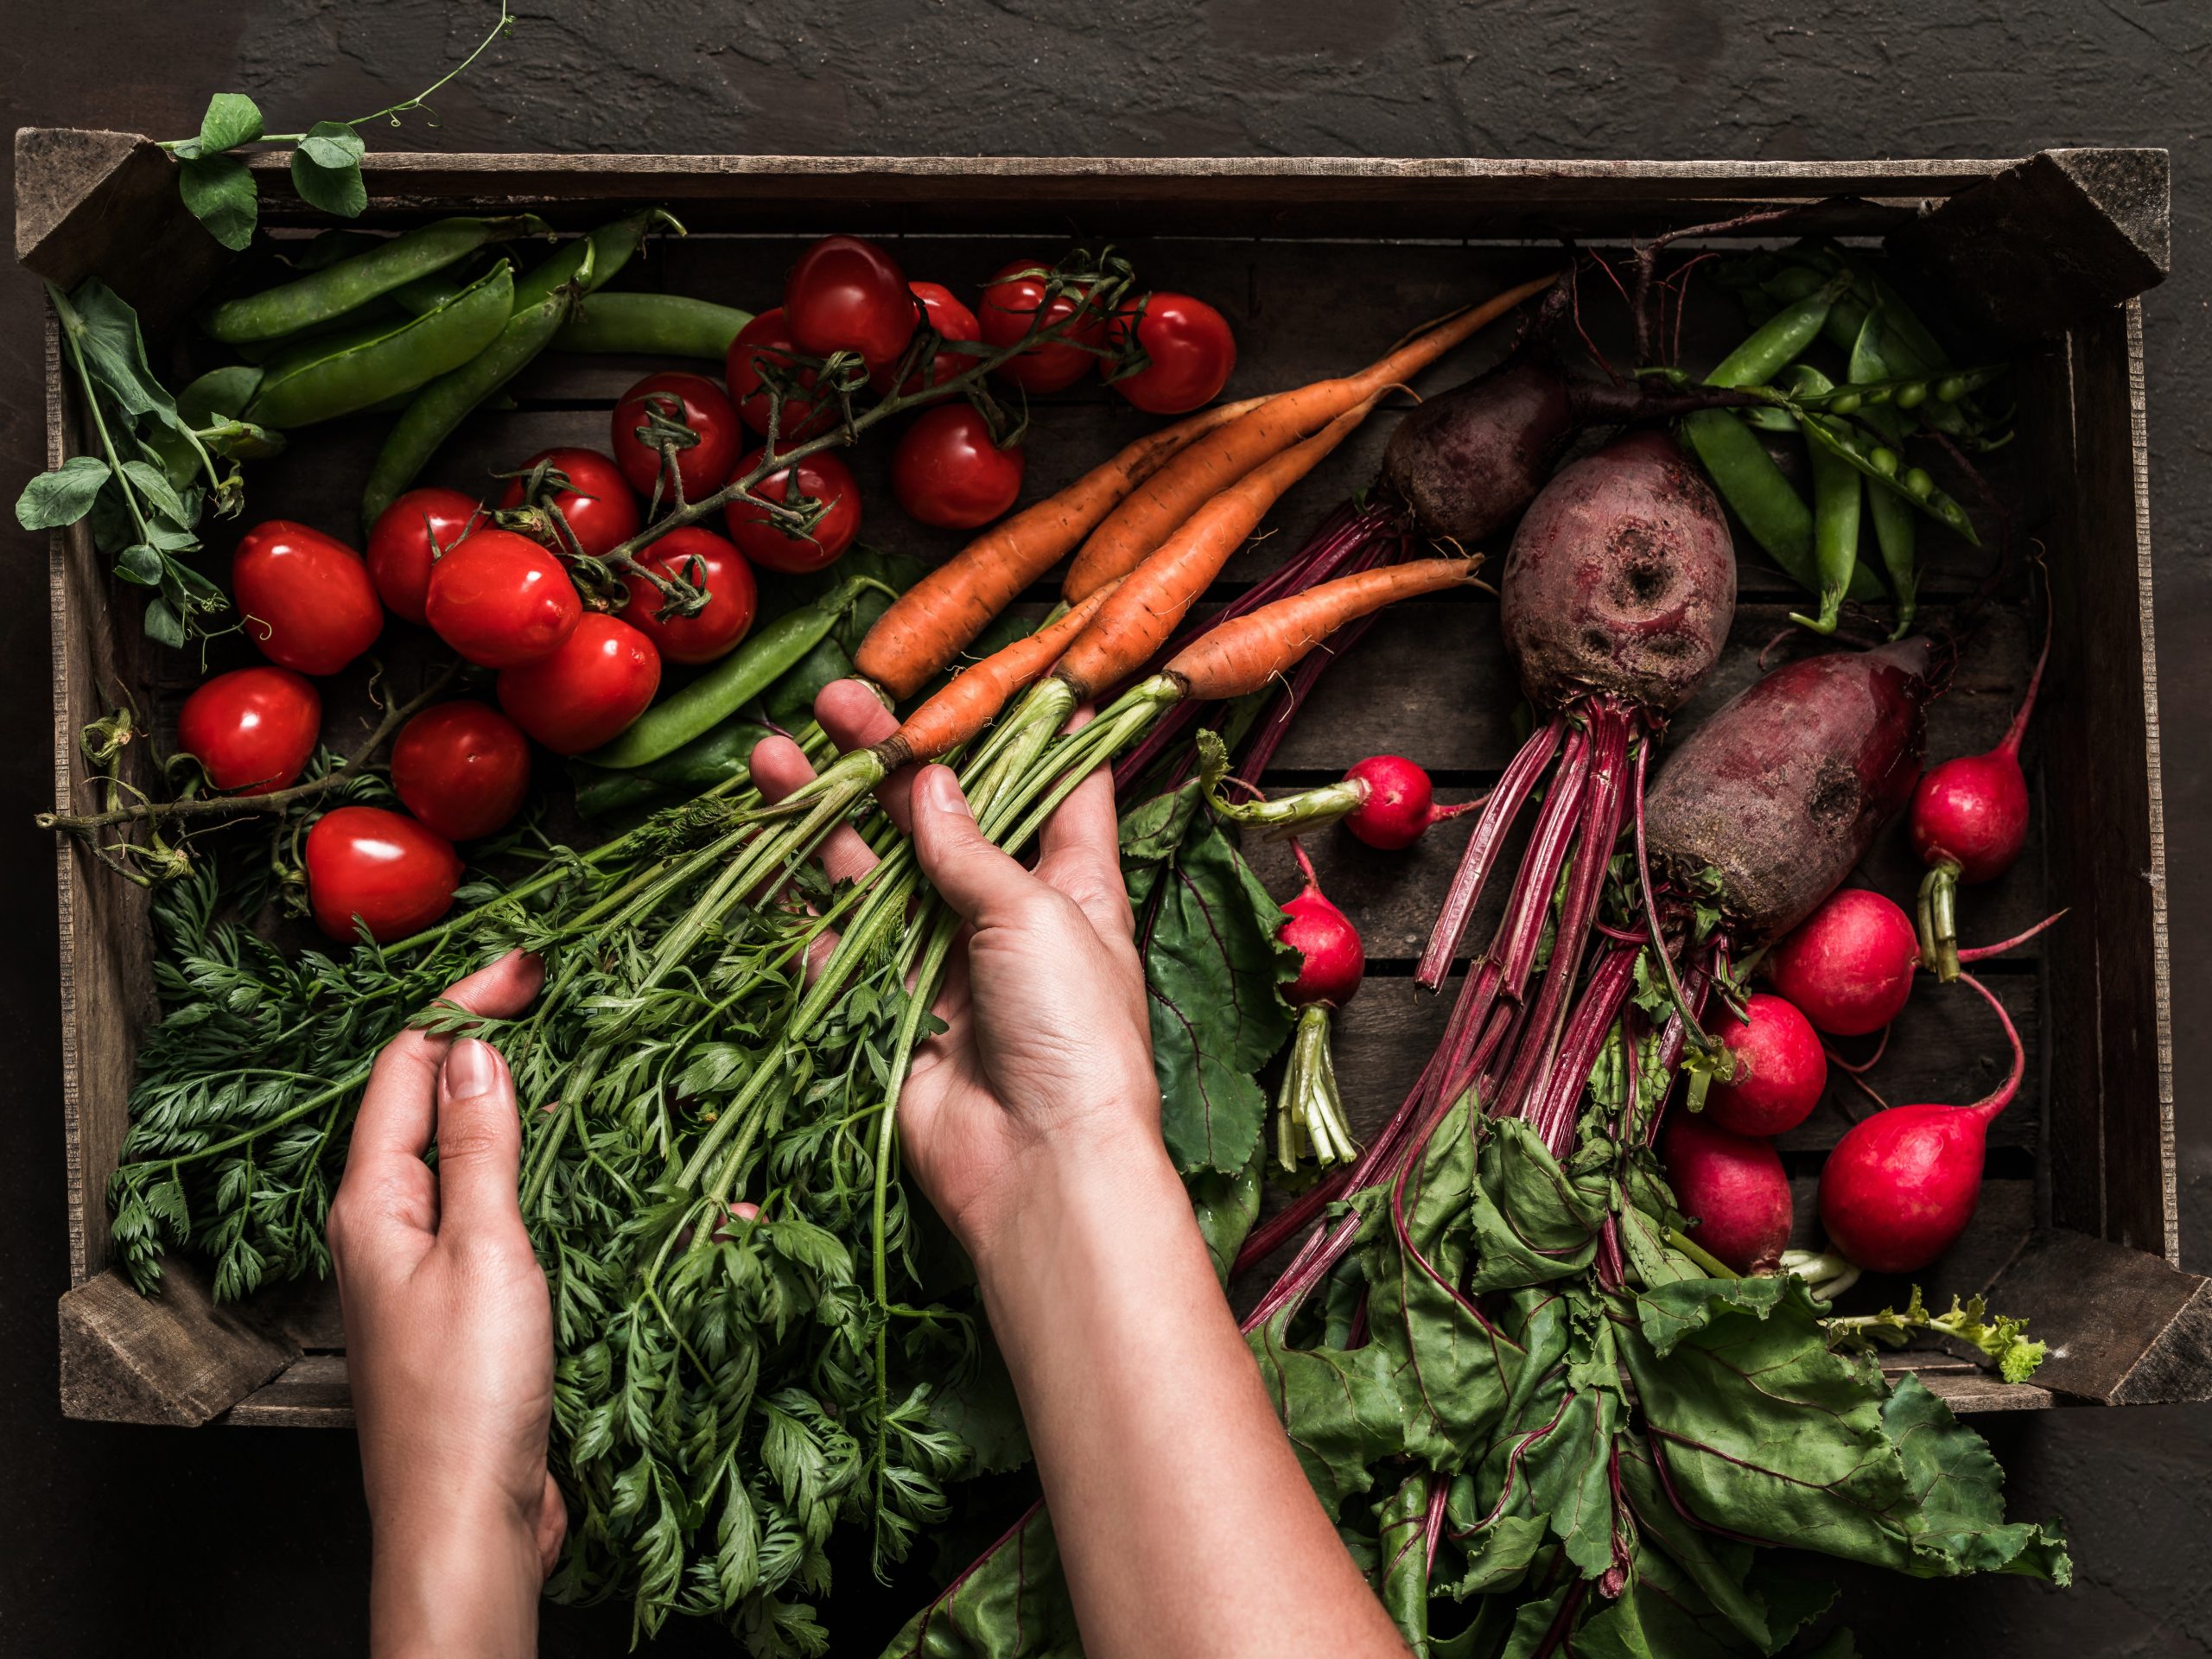 When you buy organic food, you don’t always get food free from pesticides, says UNSW expert Associate Professor Jayashree Arcot.